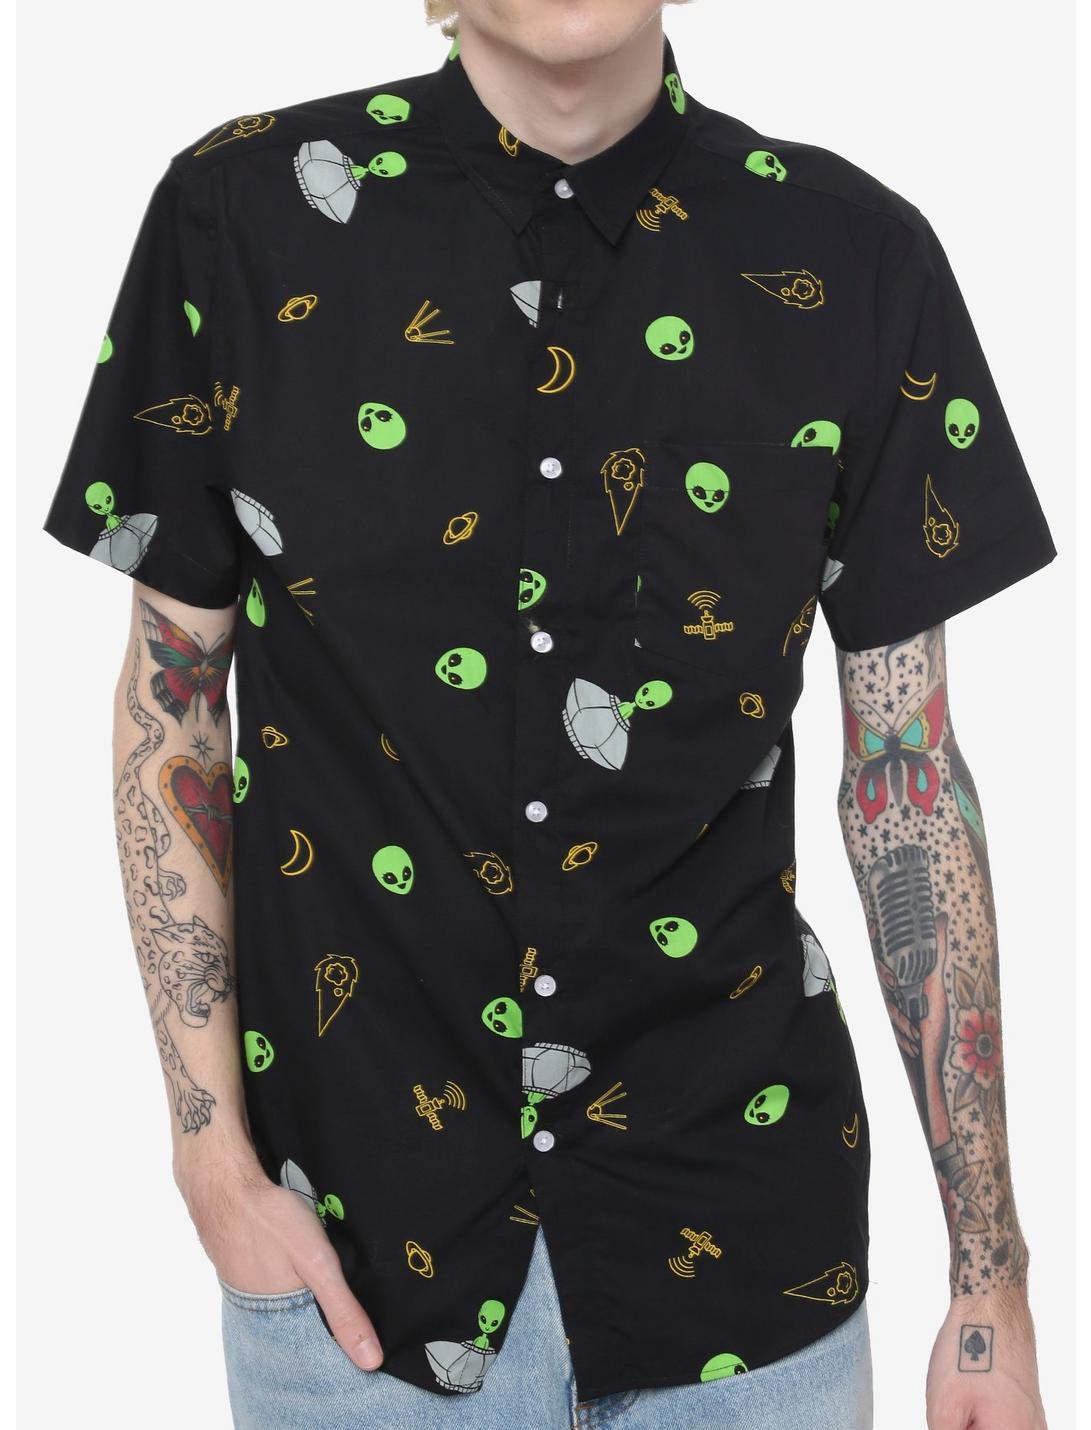 Aliens & Spaceships Woven Button-Up, BLACK, hi-res